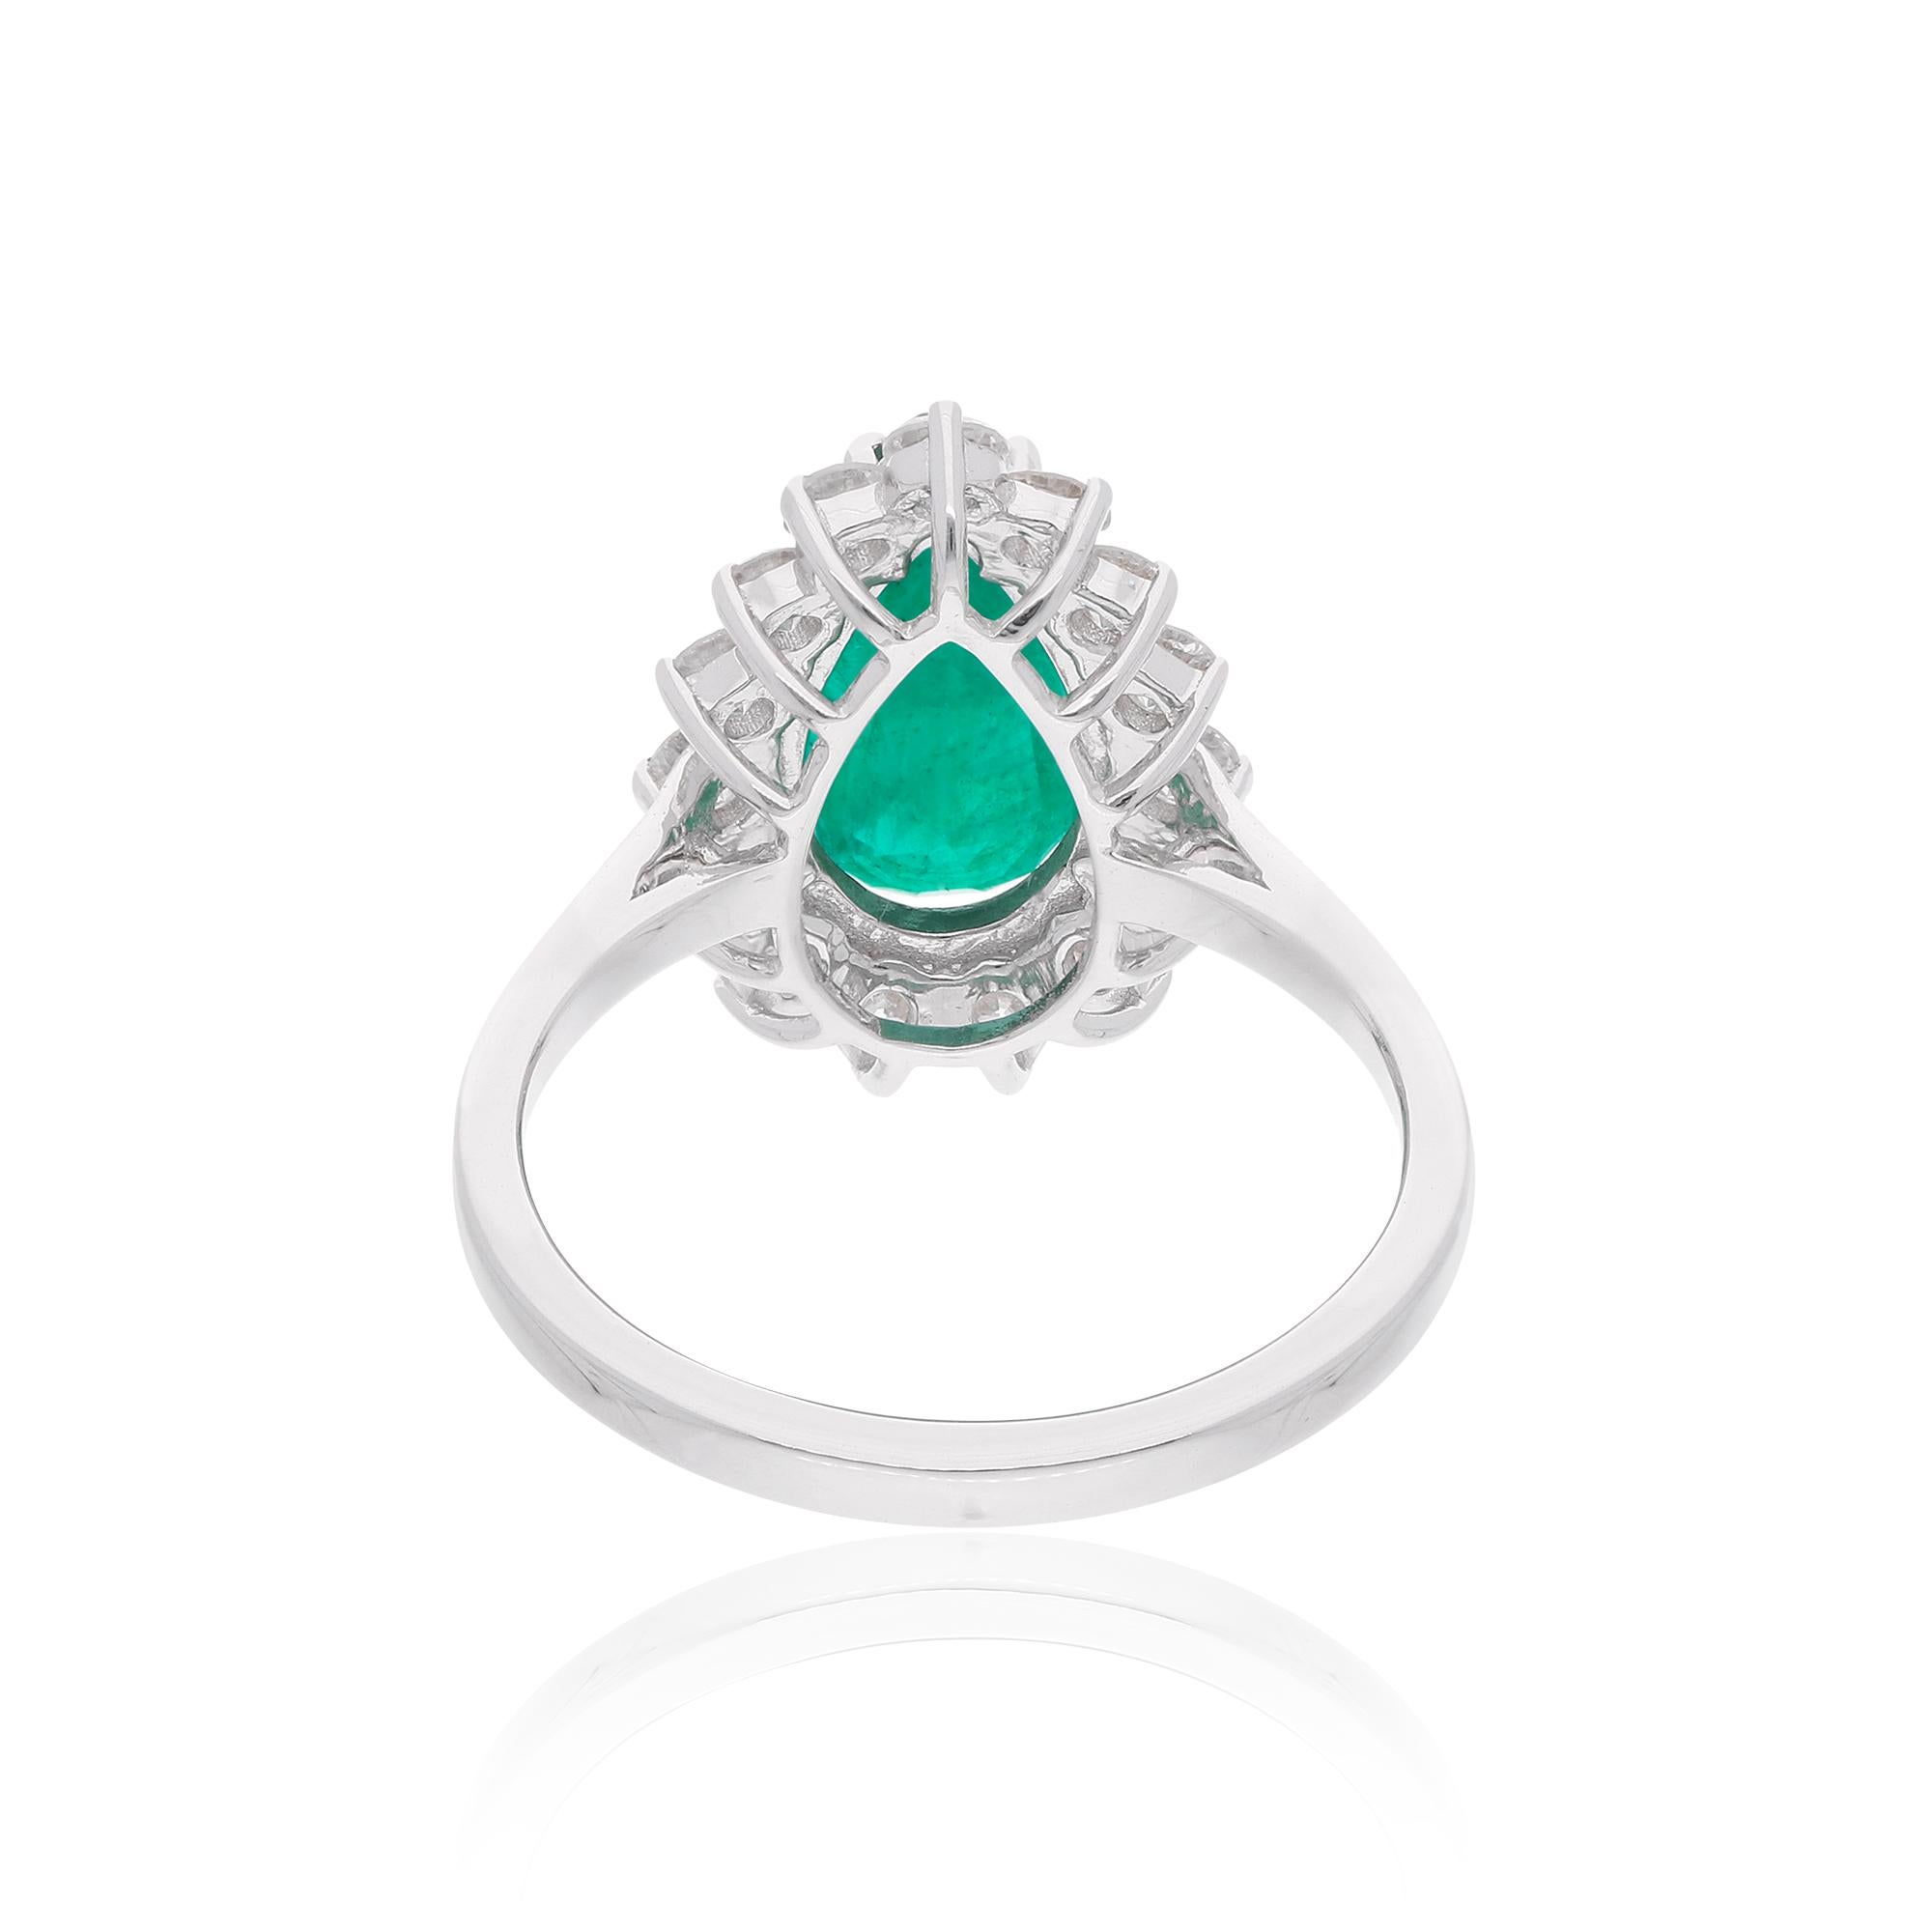 Item Code :- SER-22596
Gross Wt. :- 4.46 gm
18k White Gold Wt. :- 3.72 gm
Natural Diamond Wt. :- 0.91 Ct. ( AVERAGE DIAMOND CLARITY SI1-SI2 & COLOR H-I )
Emerald Wt. :- 2.77 Ct.
Ring Size :- 7 US & All size available

✦